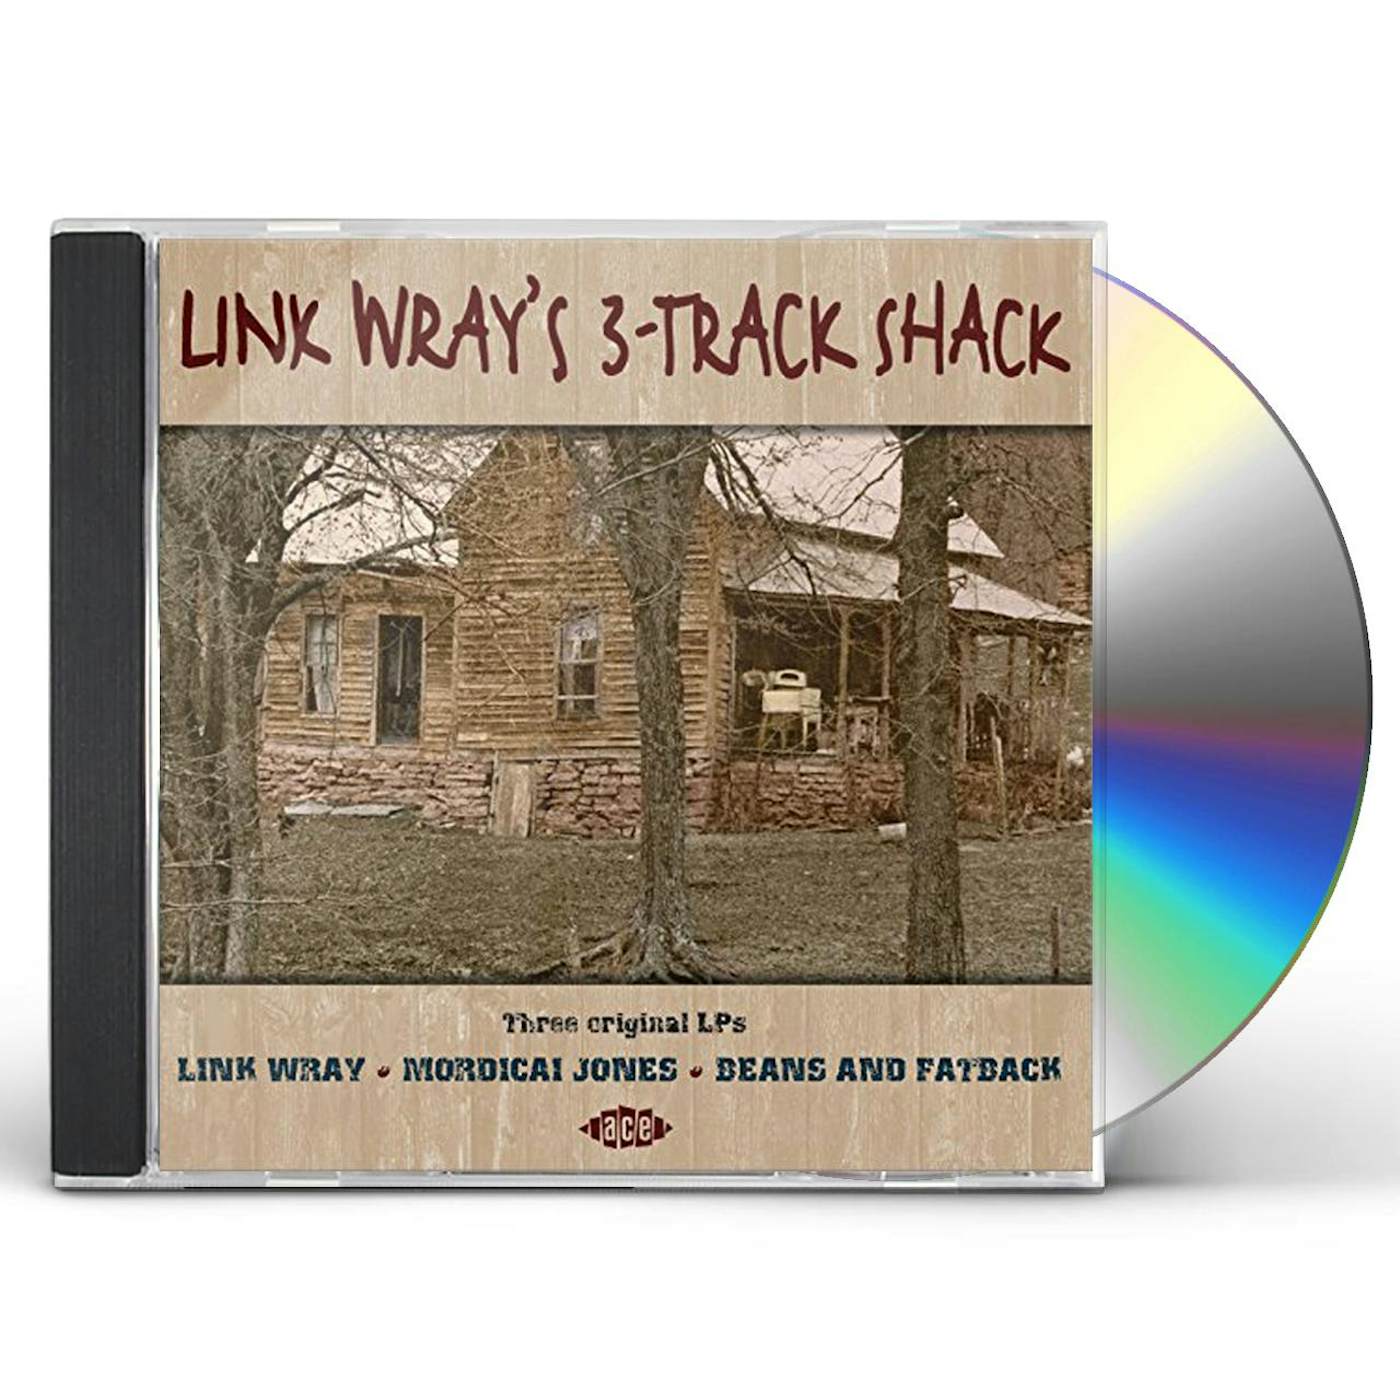 LINK WRAY'S 3-TRACK SHACK CD